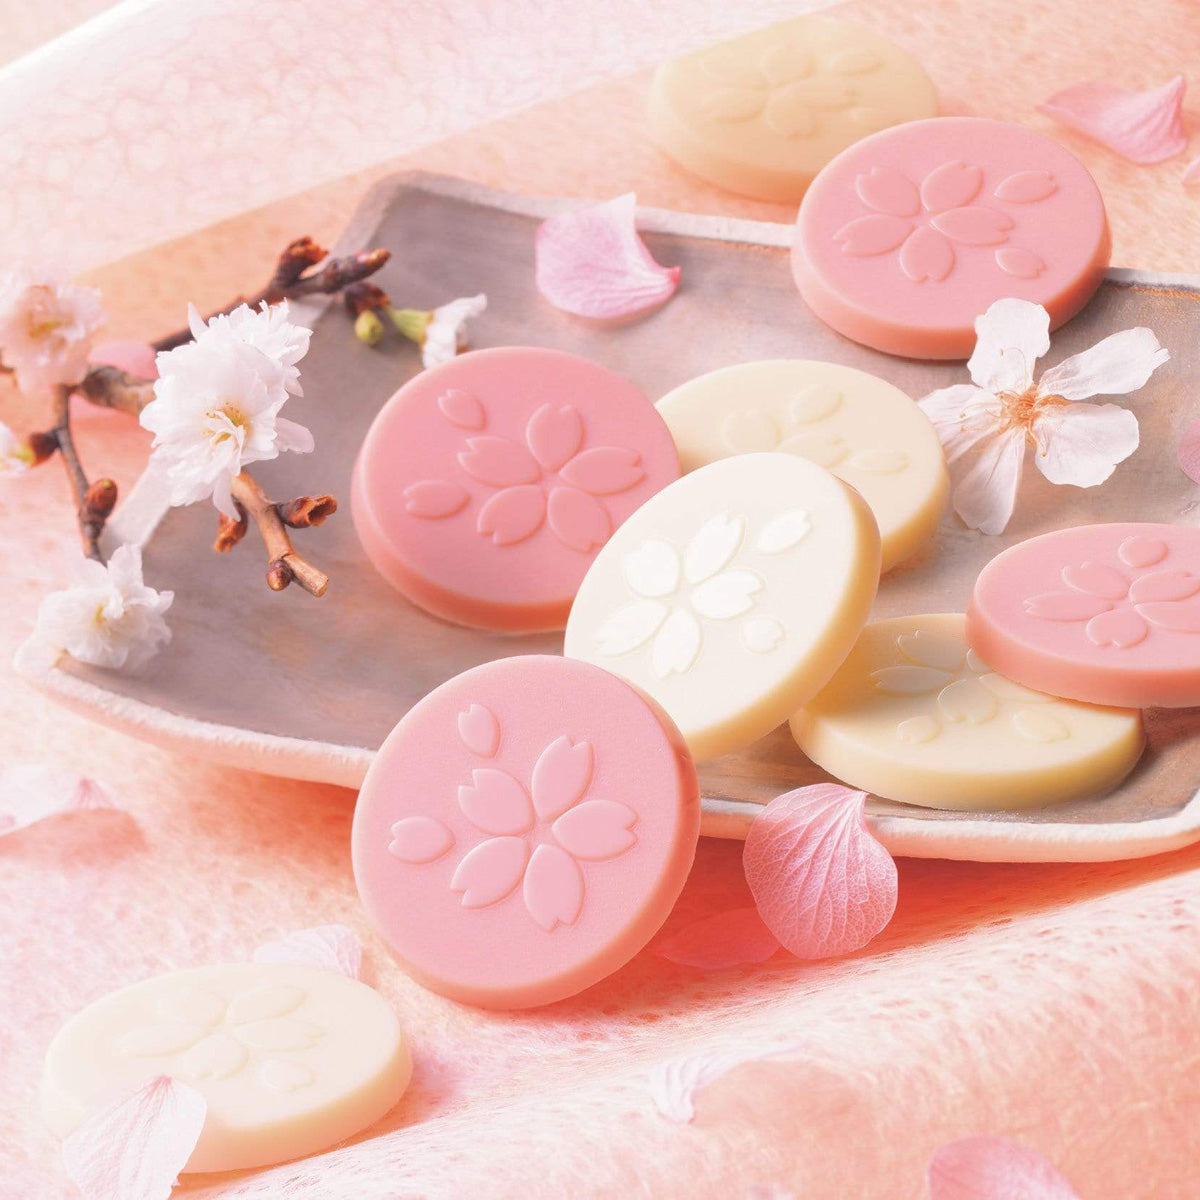 Image shows pink and white chocolate discs engraved with a flower pattern. Accents include loose flowers and a plate.